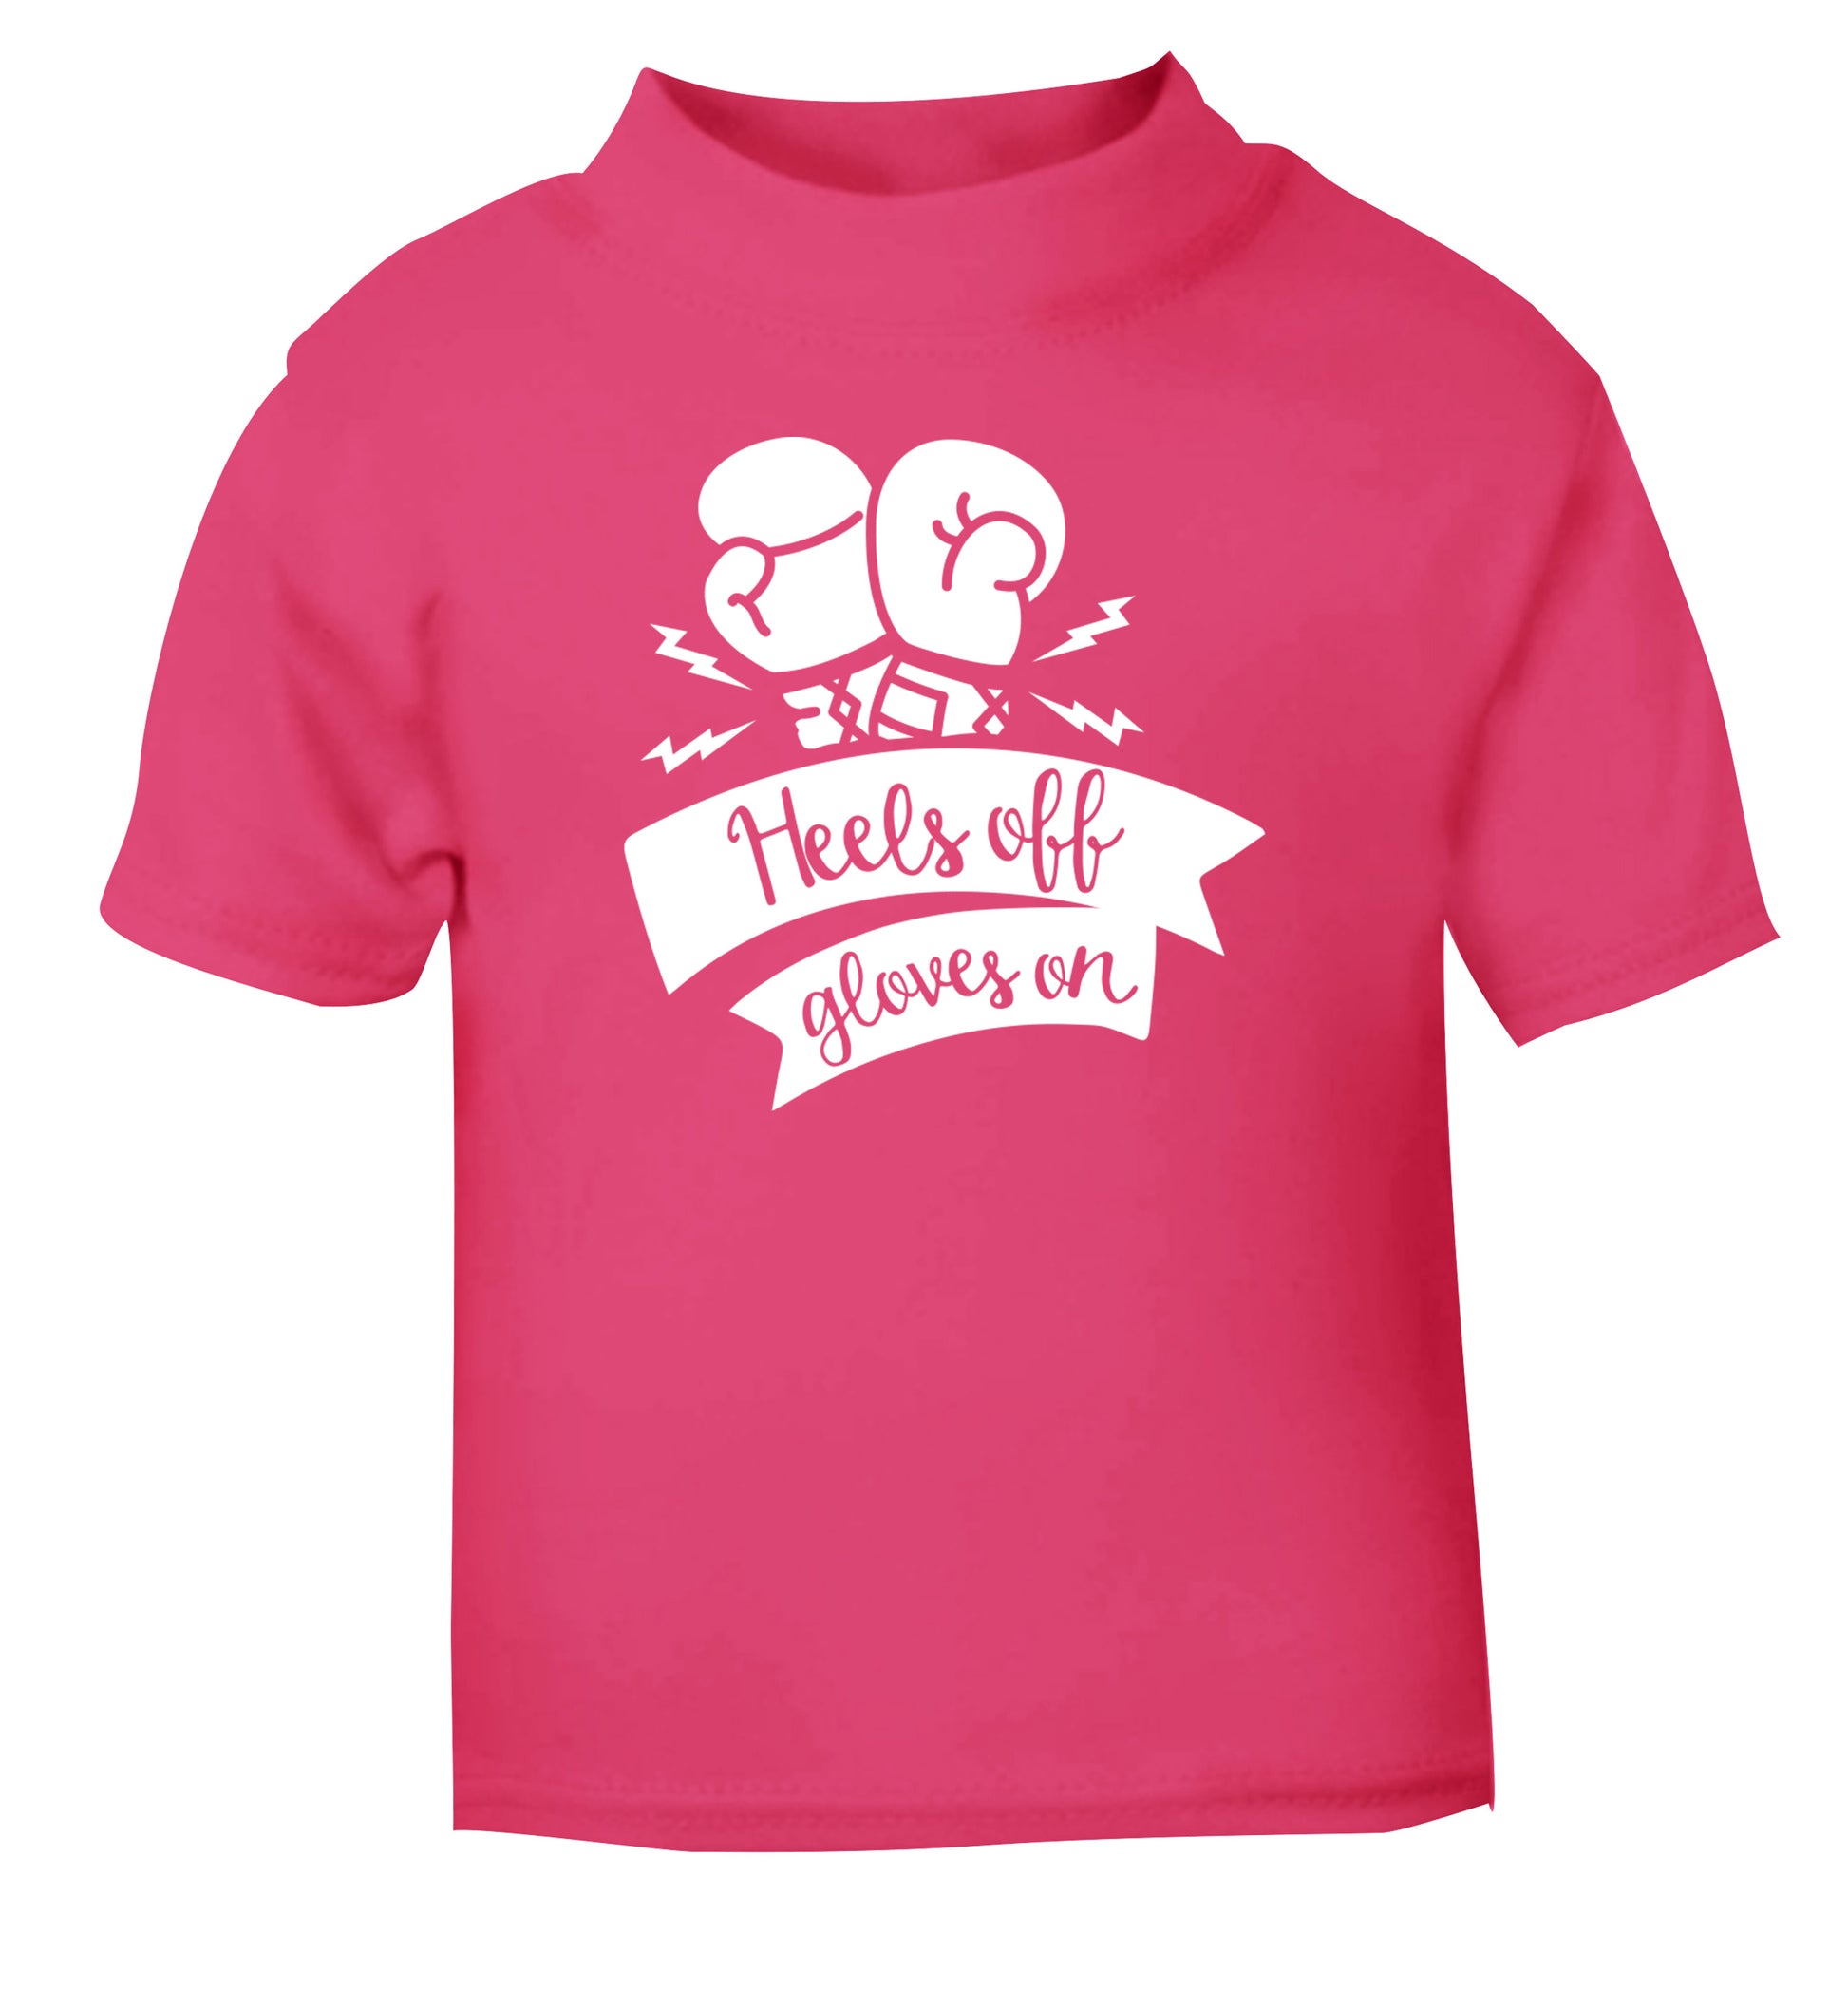 Heels off gloves on pink Baby Toddler Tshirt 2 Years